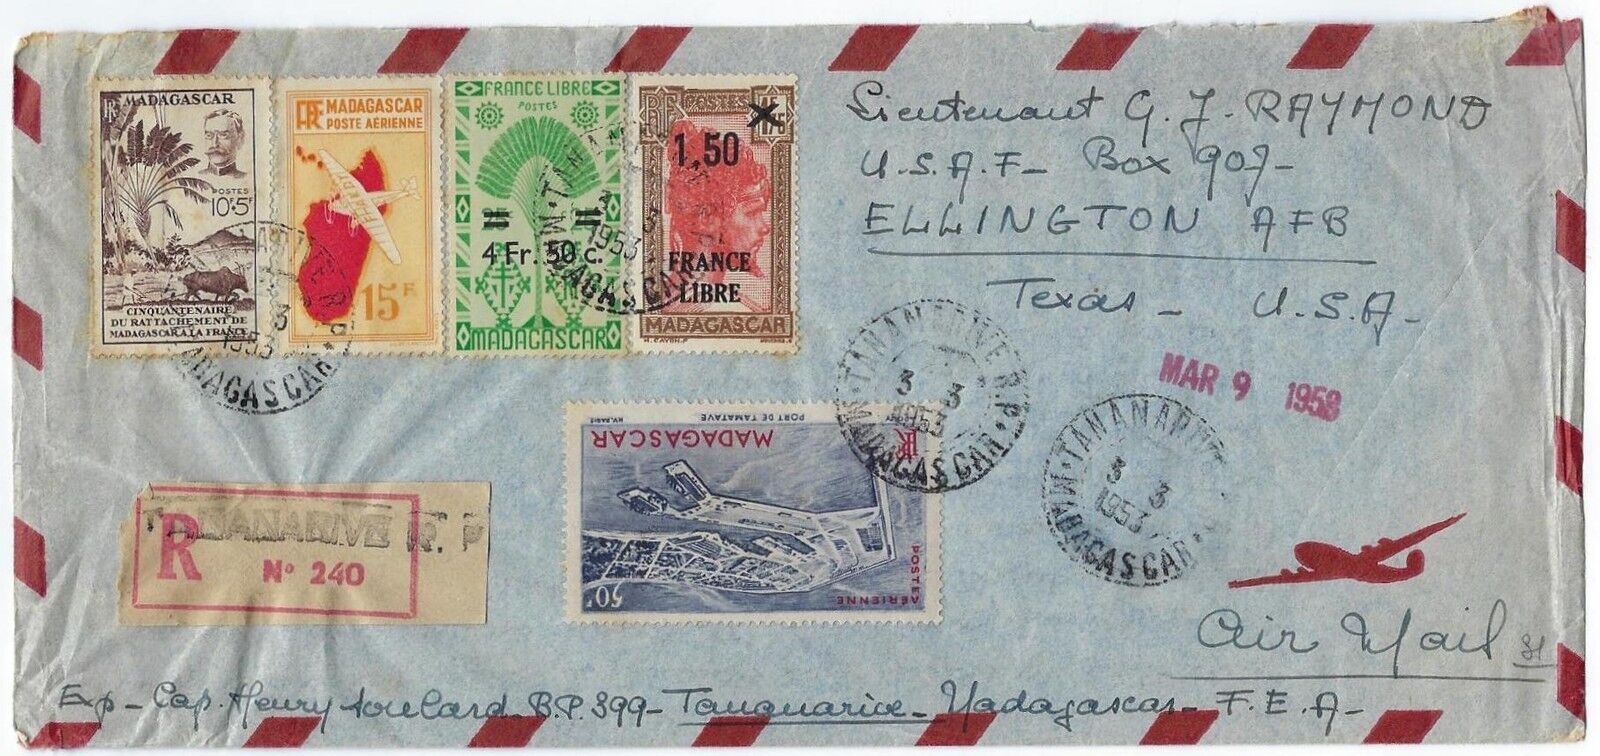 MADAGASCAR 1958 US TANANARIVE AIR MAIL REGISTERED COVER MULTIFRANKED COVER TO EL